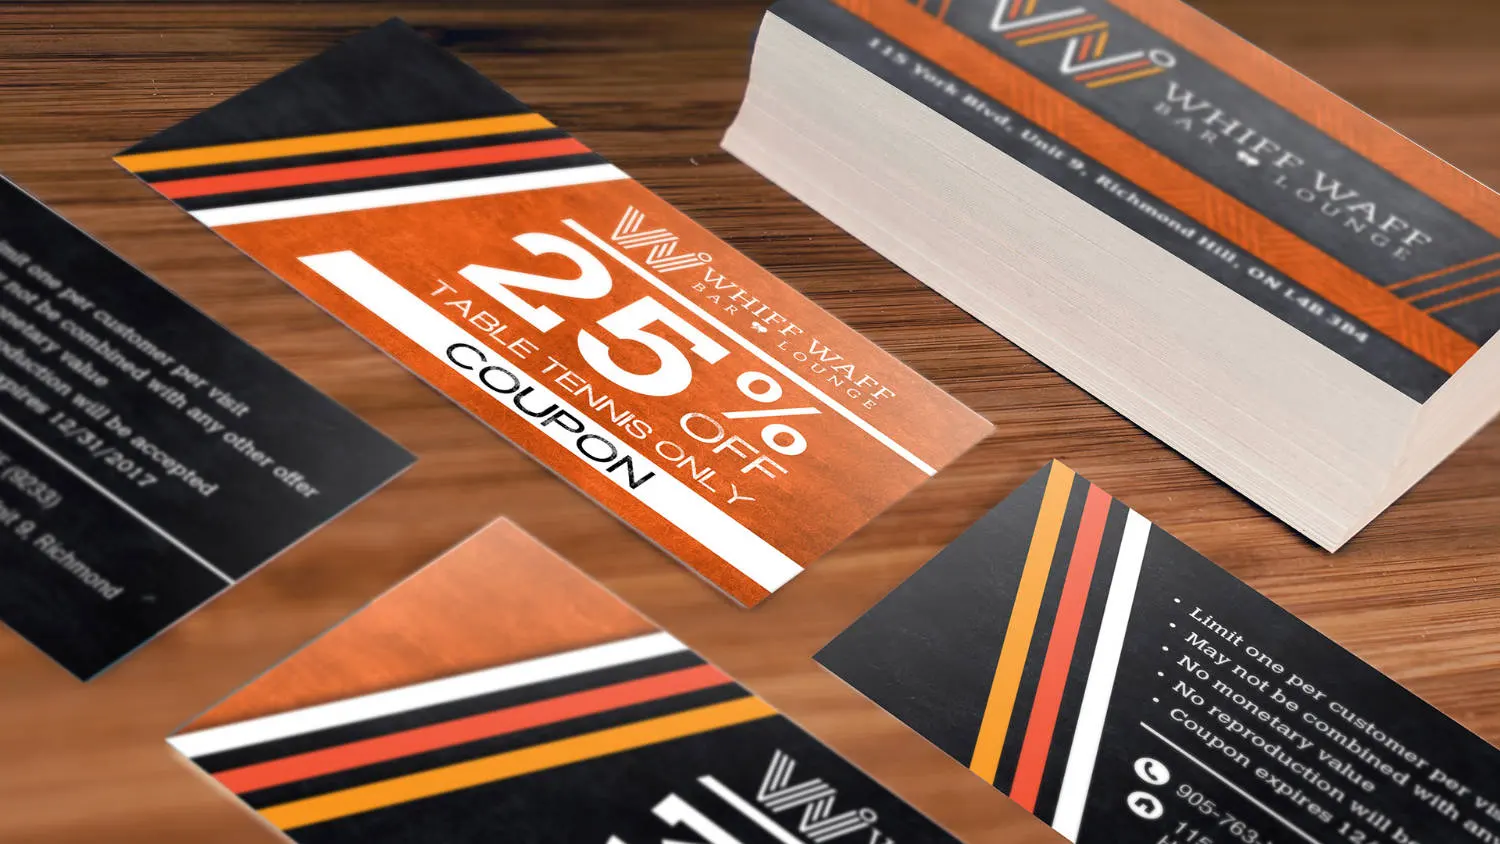 Graphic design project for Whiff Waff Bar & Lounge. Designed stationeries and coupon